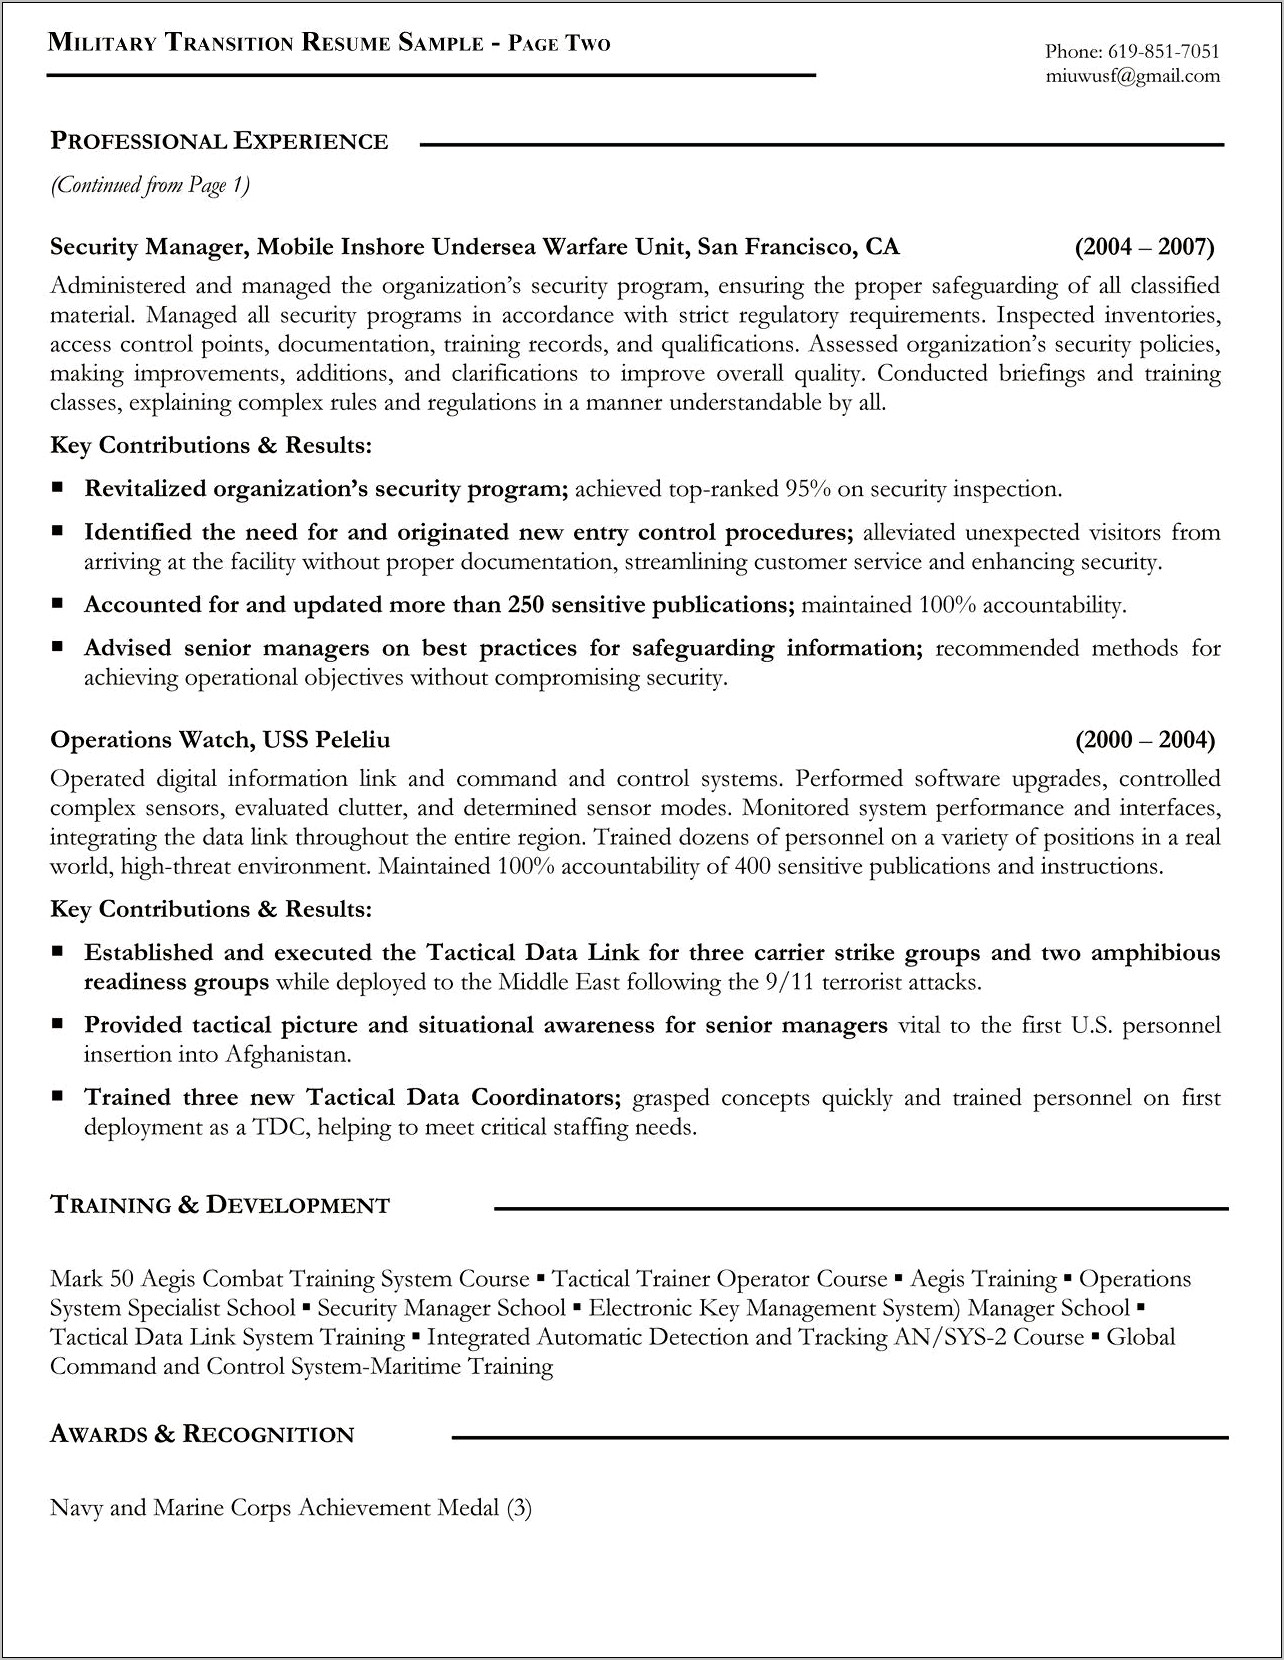 Examples Of Resumes From Military Vets